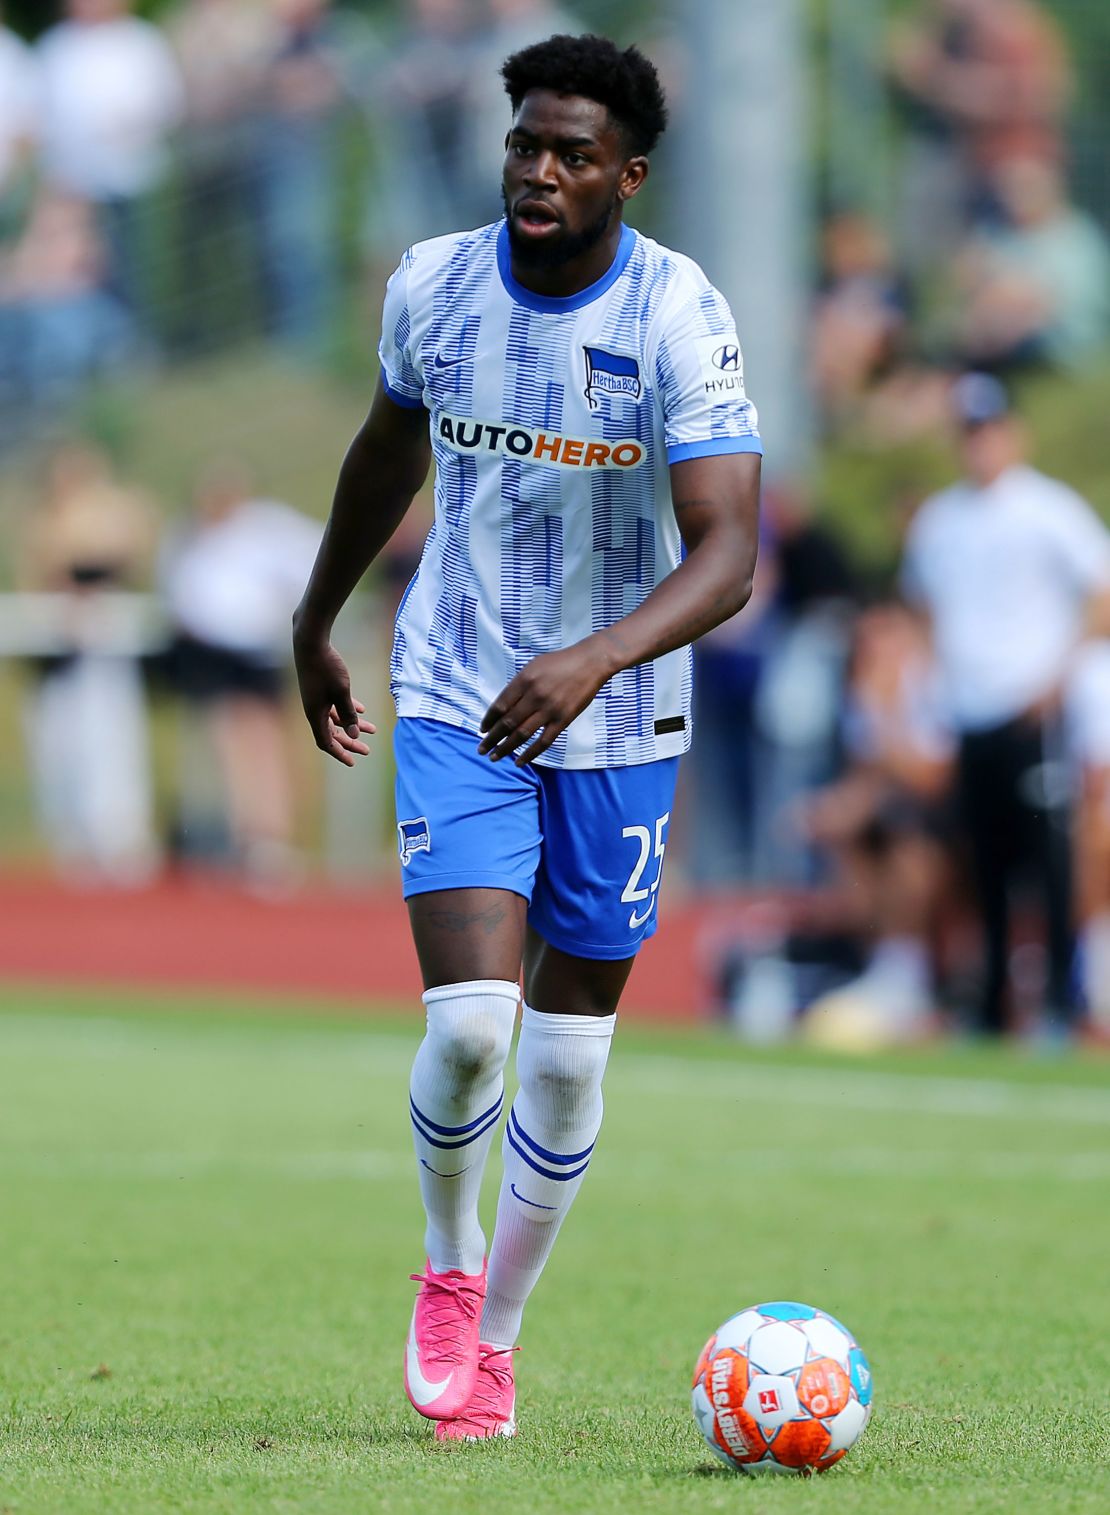 Hertha BSC's Jordan Torunarigha runs with the ball during the pre-season friendly match against MSV Neuruppin at Neuruppiner Volksparkstadion on July 7, 2021 in Neuruppin, Germany.